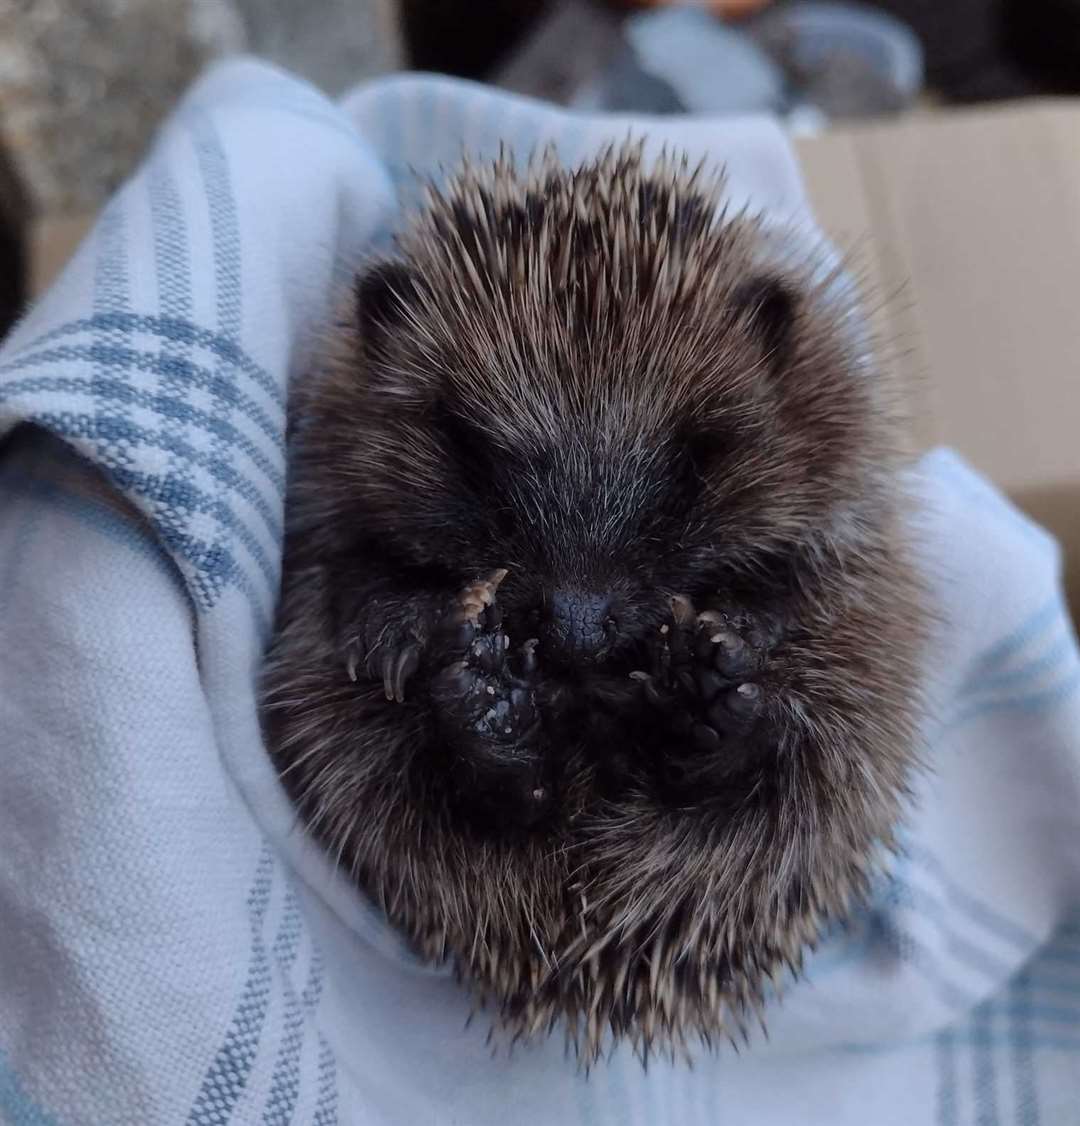 More than 60 hedgehogs like Betty have been cared for so far. Picture: Lisa Steward